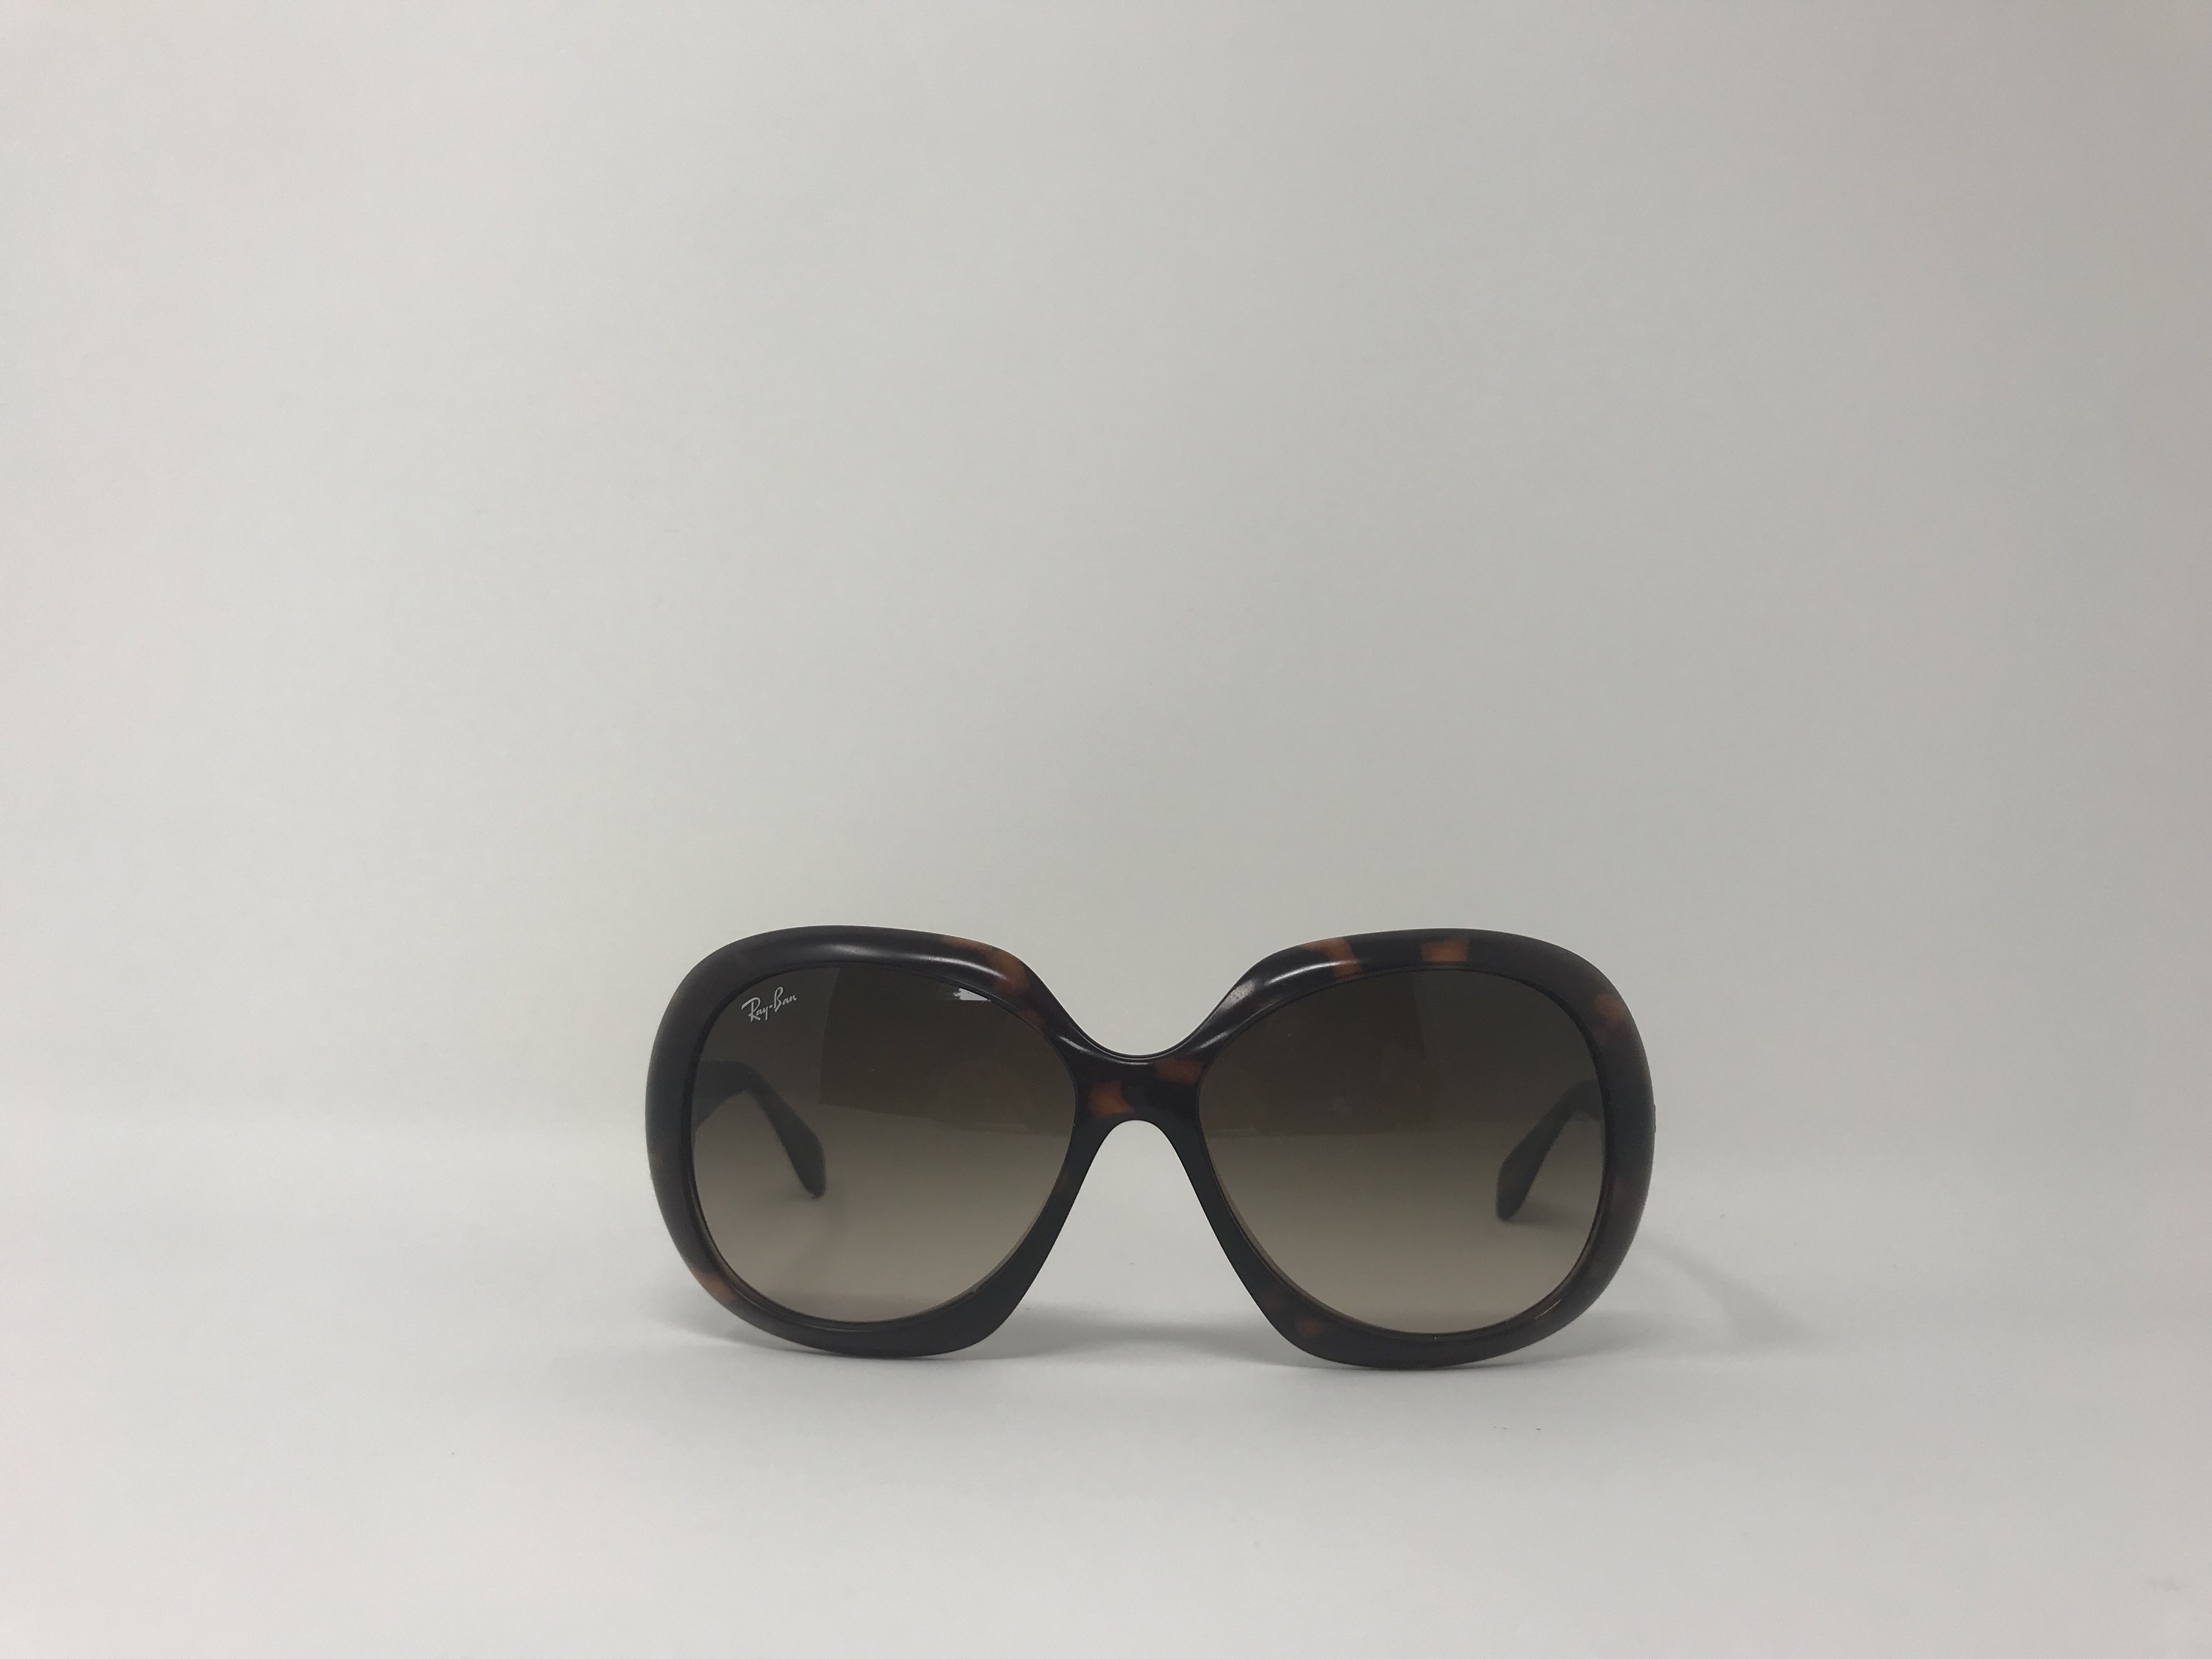 Ray Ban RB4208 Unisex Brown sunglasses